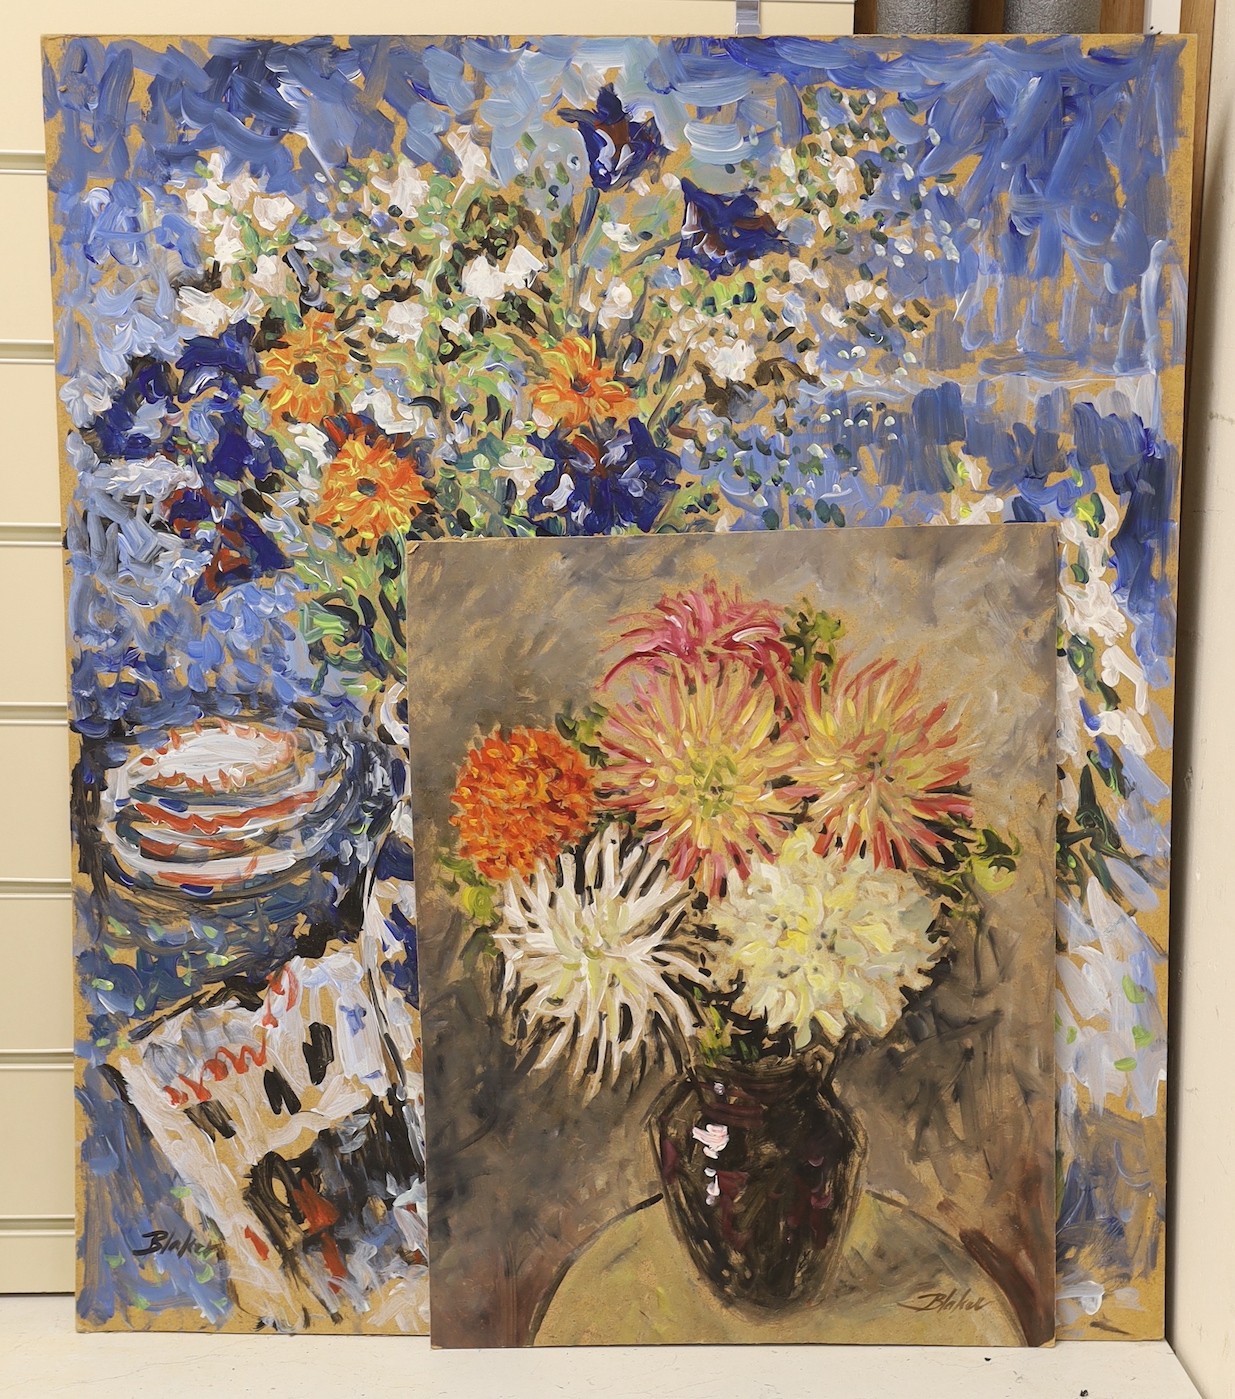 Michael Blaker (1928-2018) - Two still life subjects - vase of flowers, oil on board, signed, unframed, 72 x 61cms. and chrysanthemums in vase, oil on board, signed, unframed, 45 x 35.5cms.